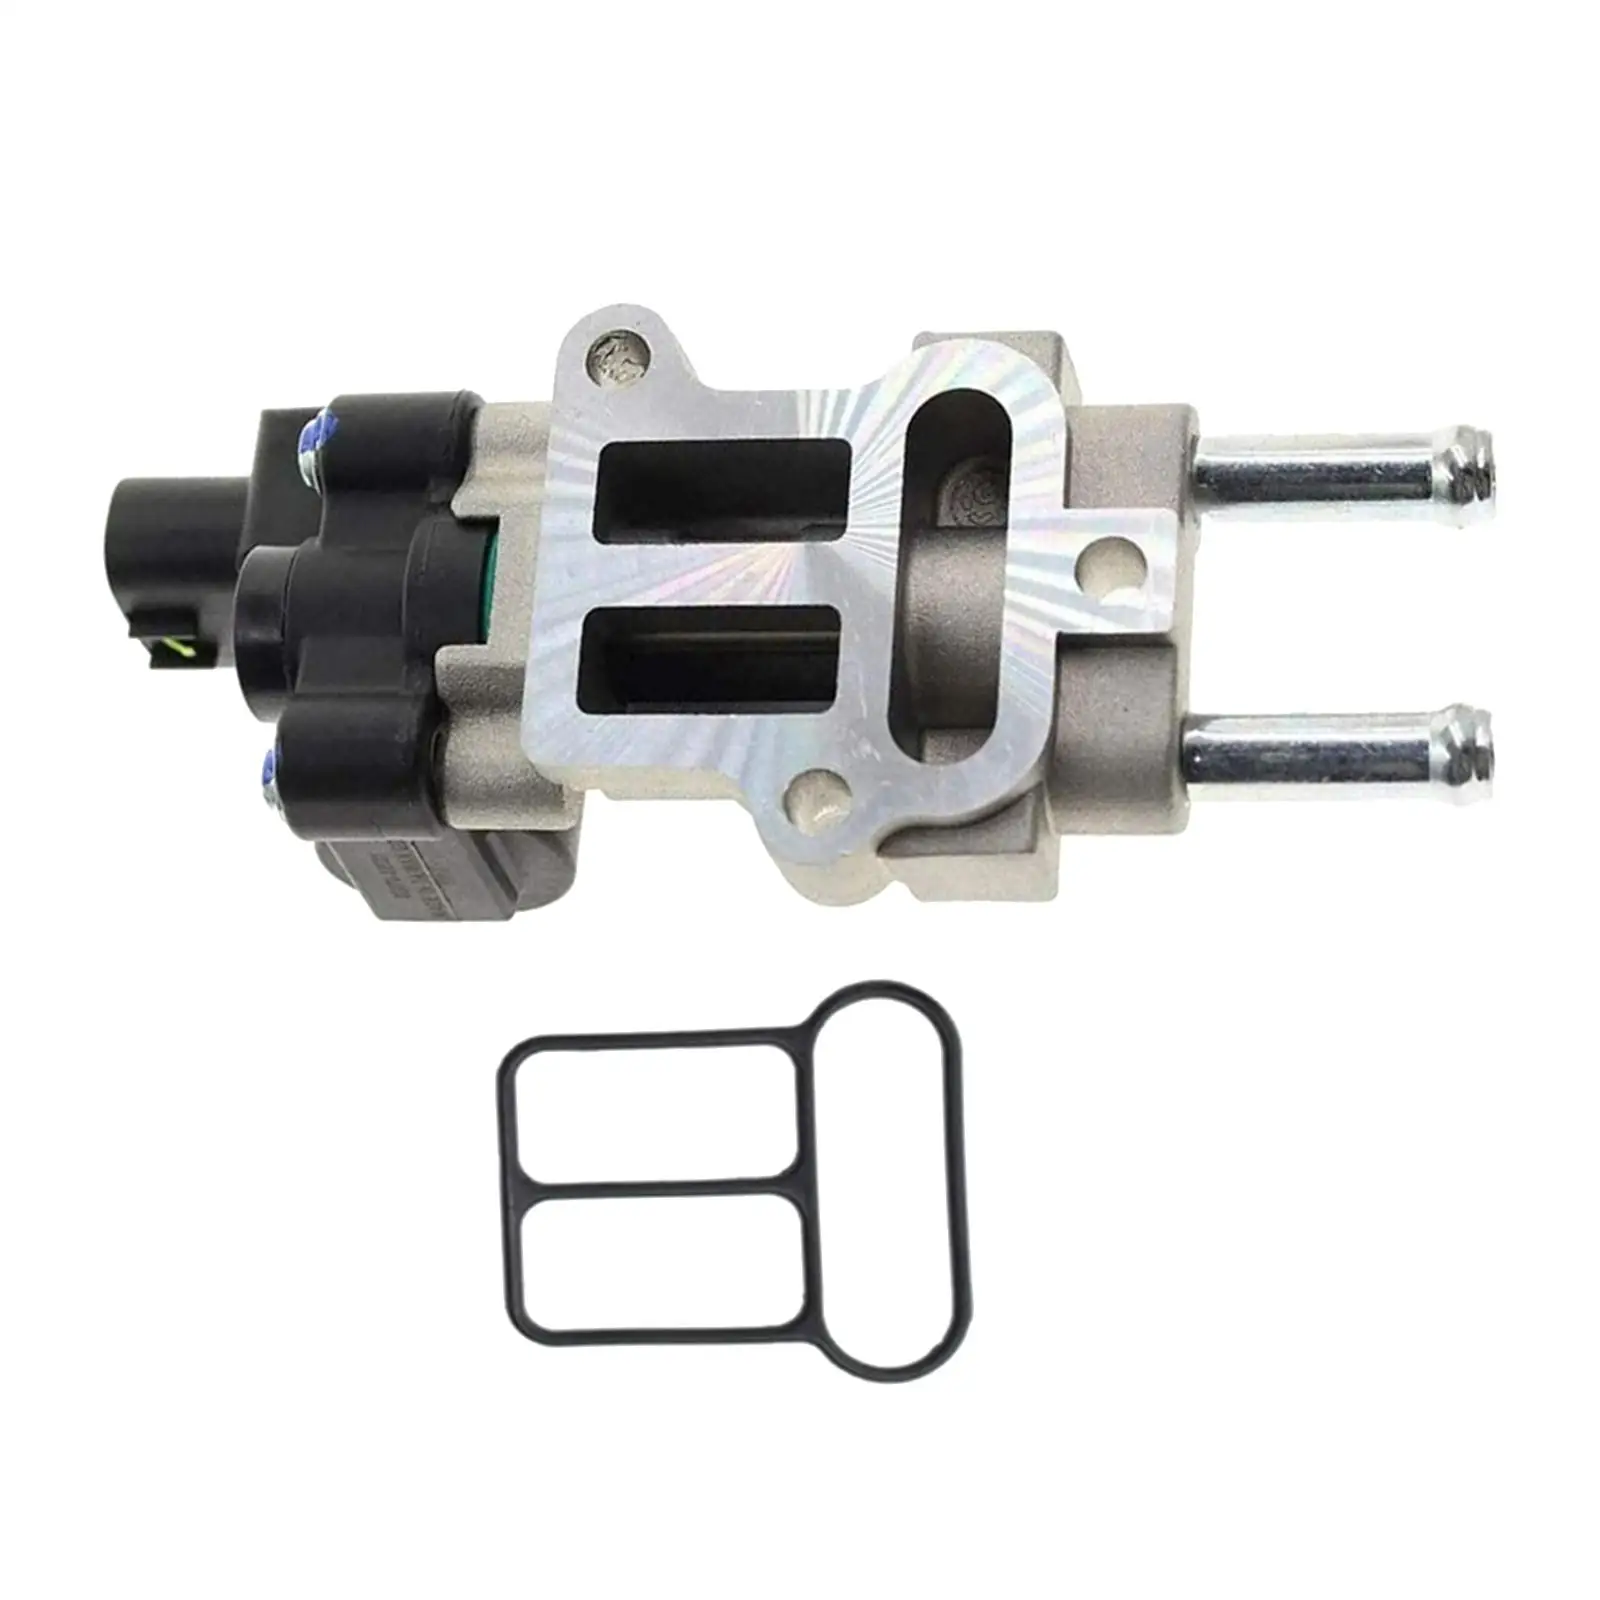 Idle Iac Motor Replaces for 2000 22270-22031 22270 22031 Professional High Quality